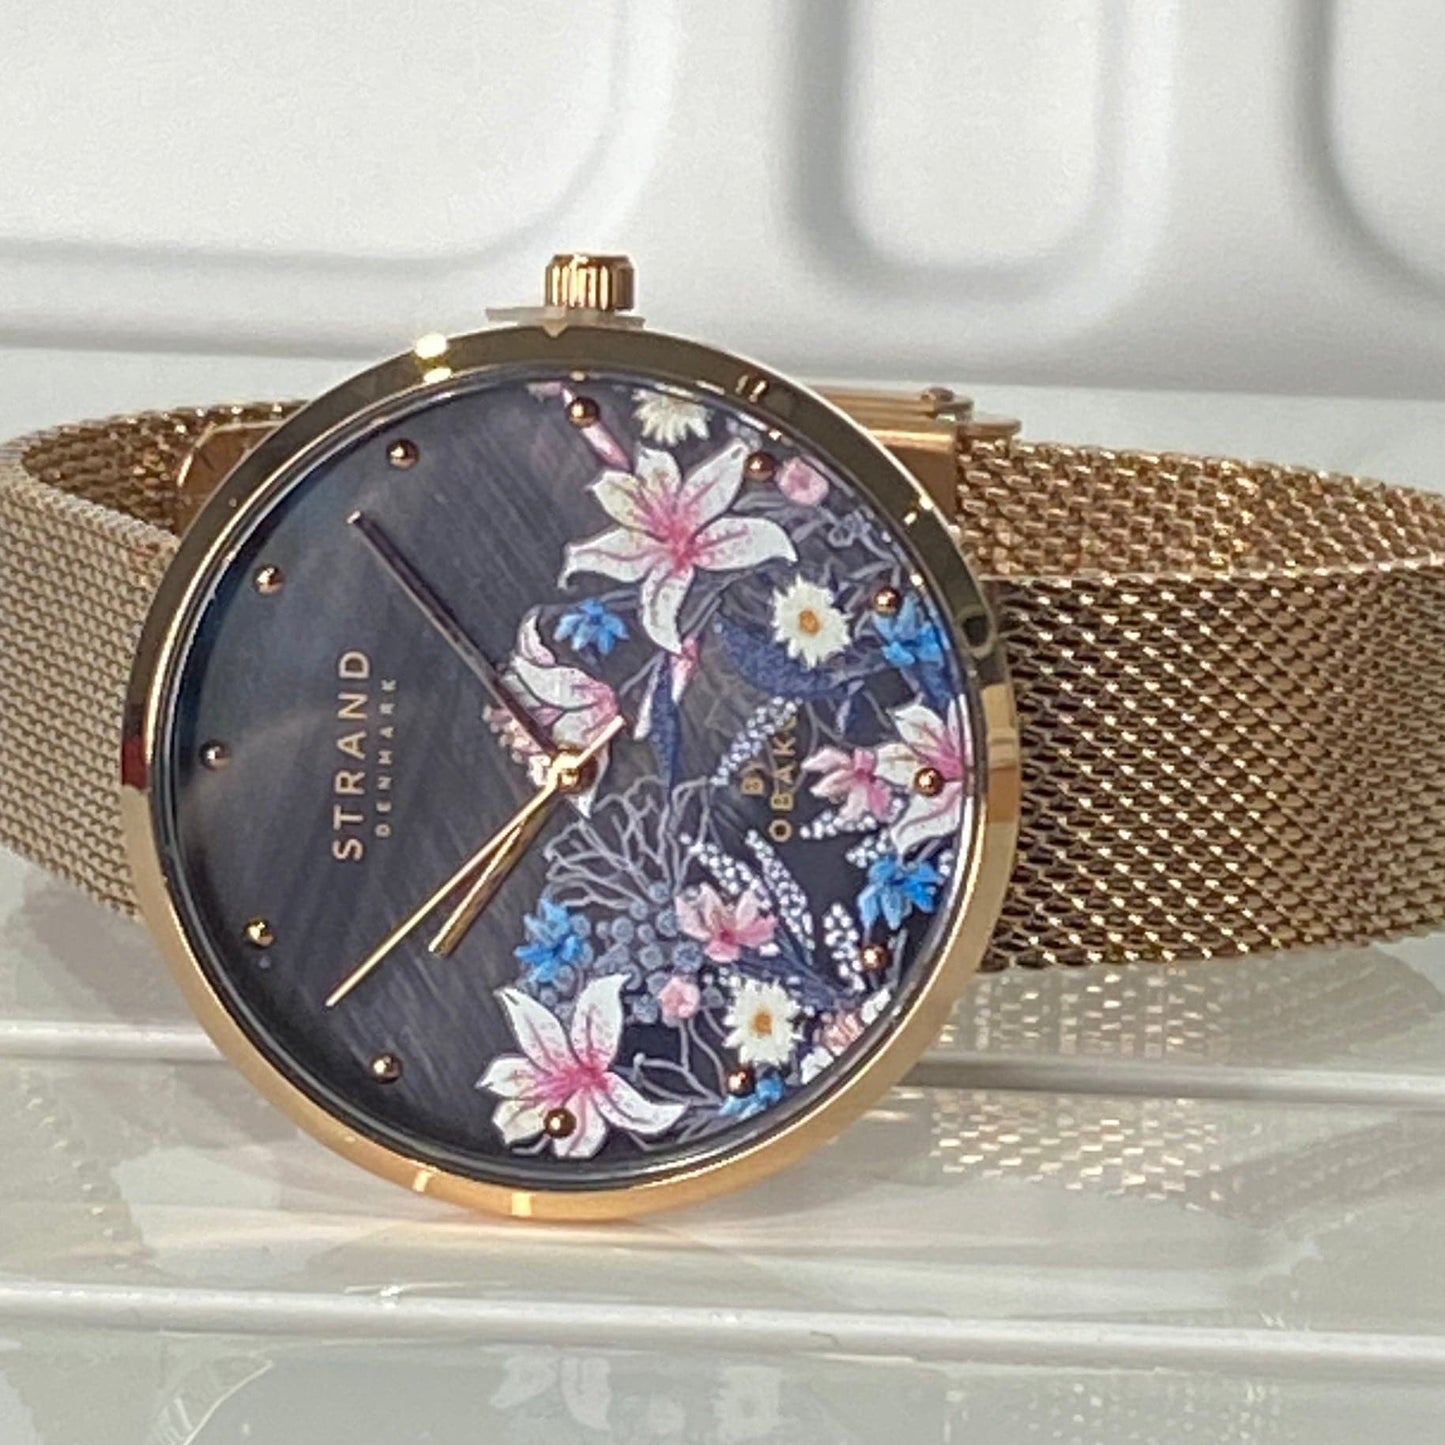 Floral Ladies Watch from STRAND - Gold Multi Mesh Strap